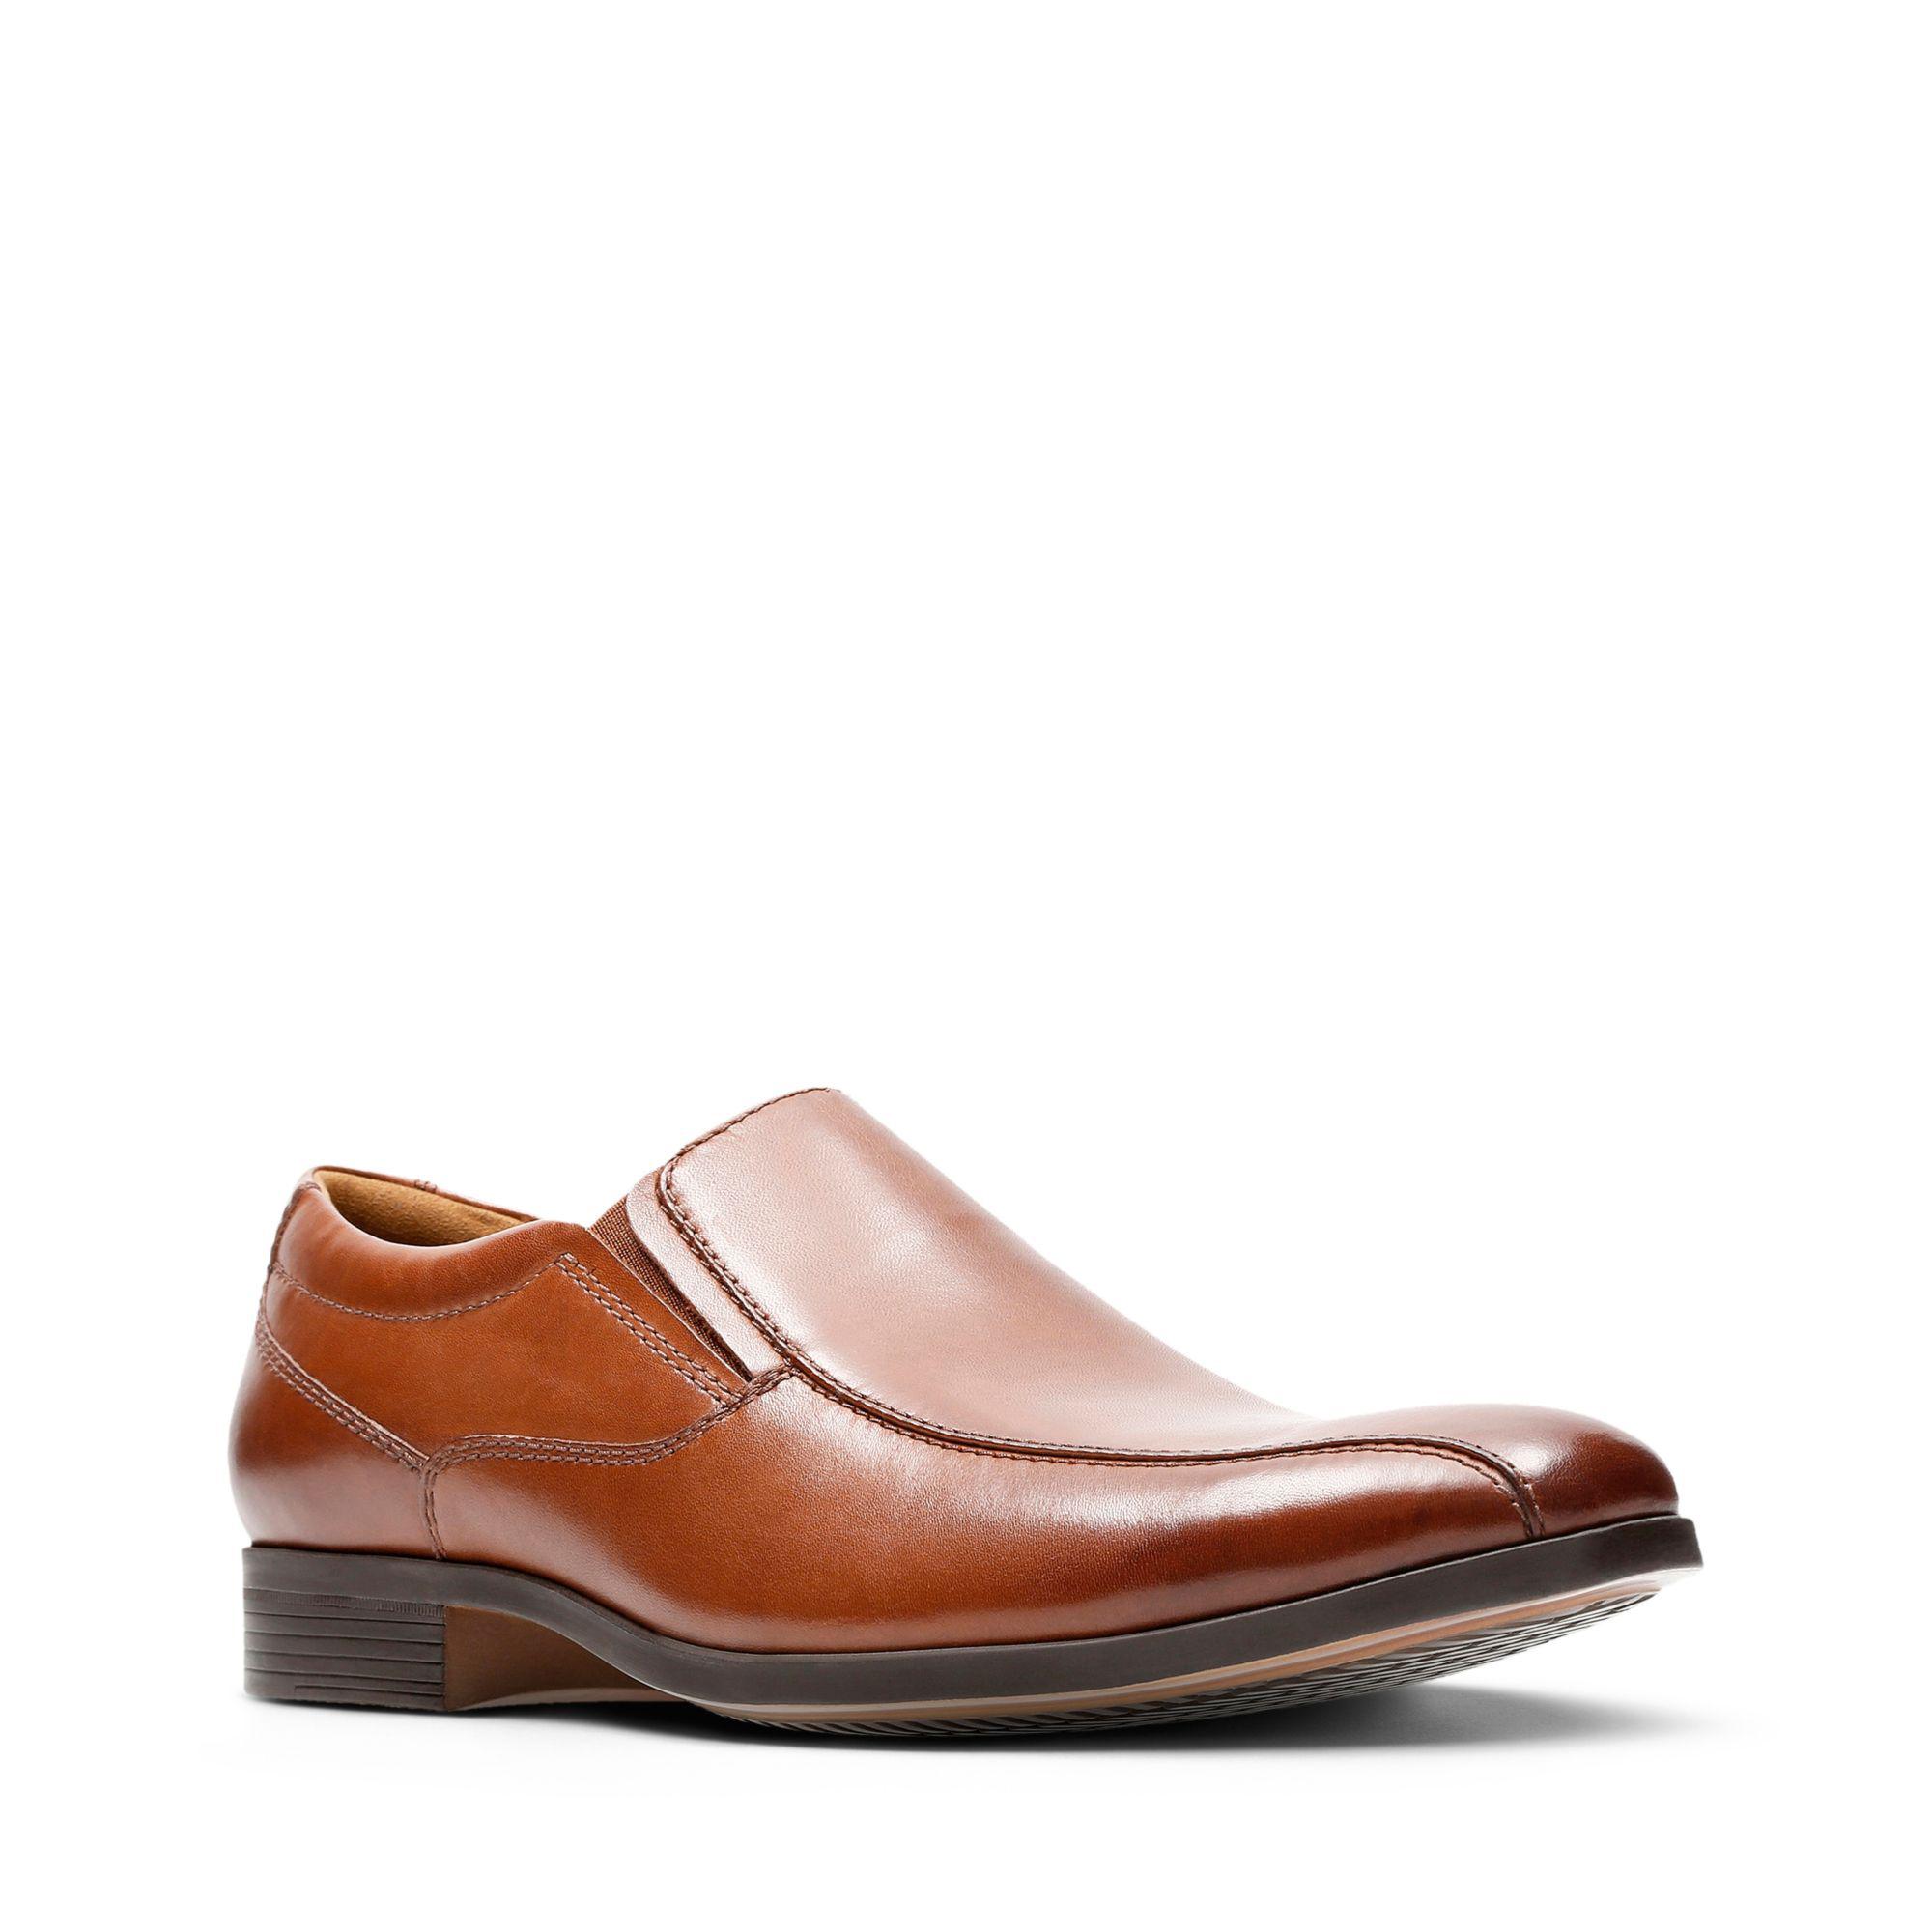 Clarks Leather Conwell Step in Tan 